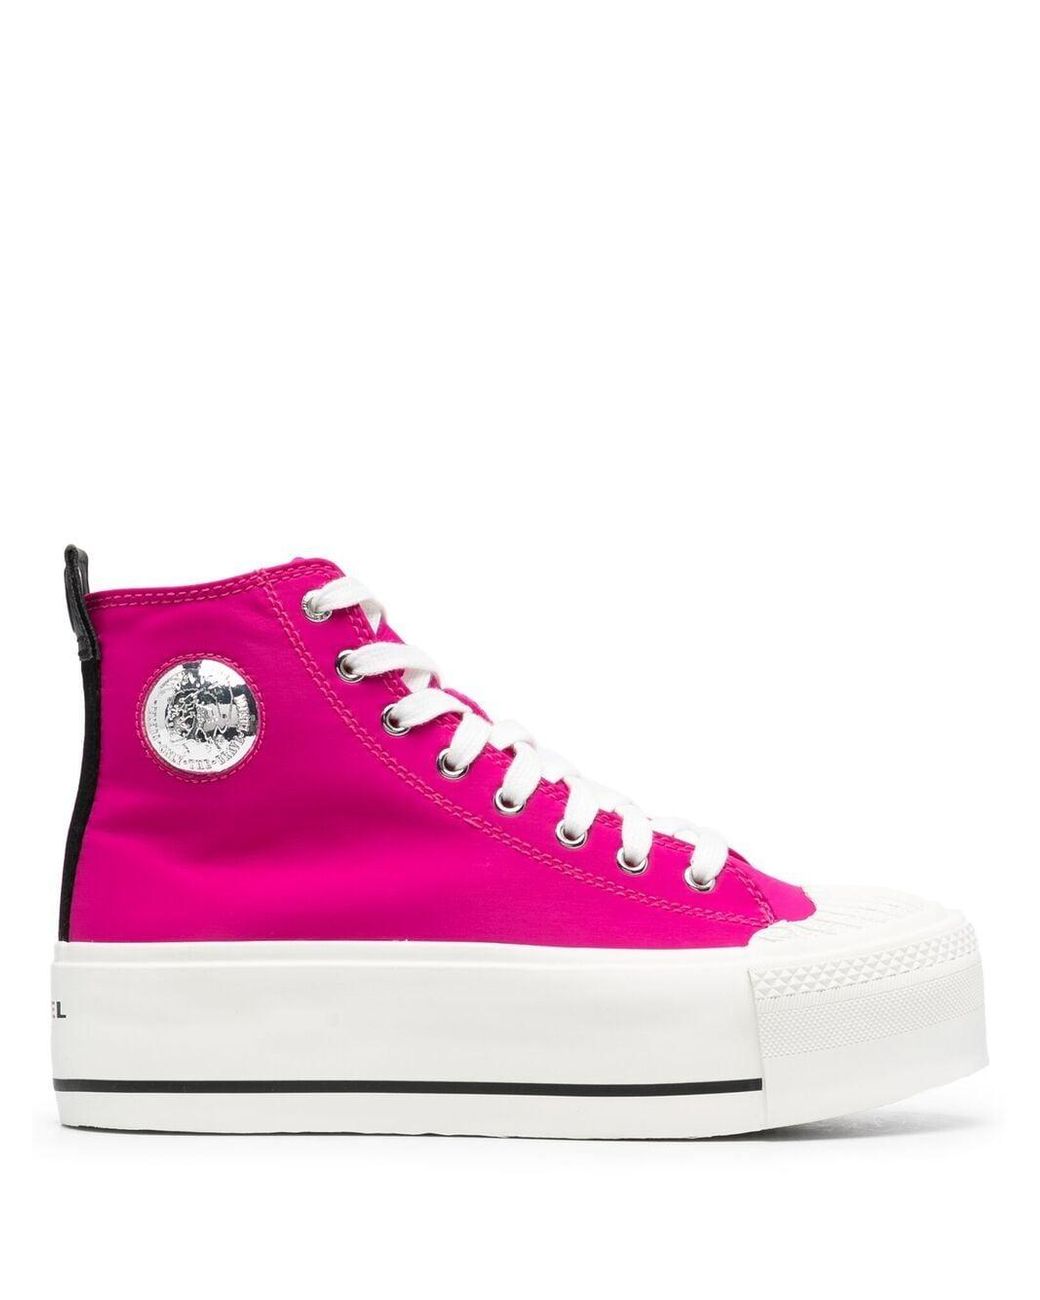 DIESEL S-astico Wedge Trainers in Pink | Lyst